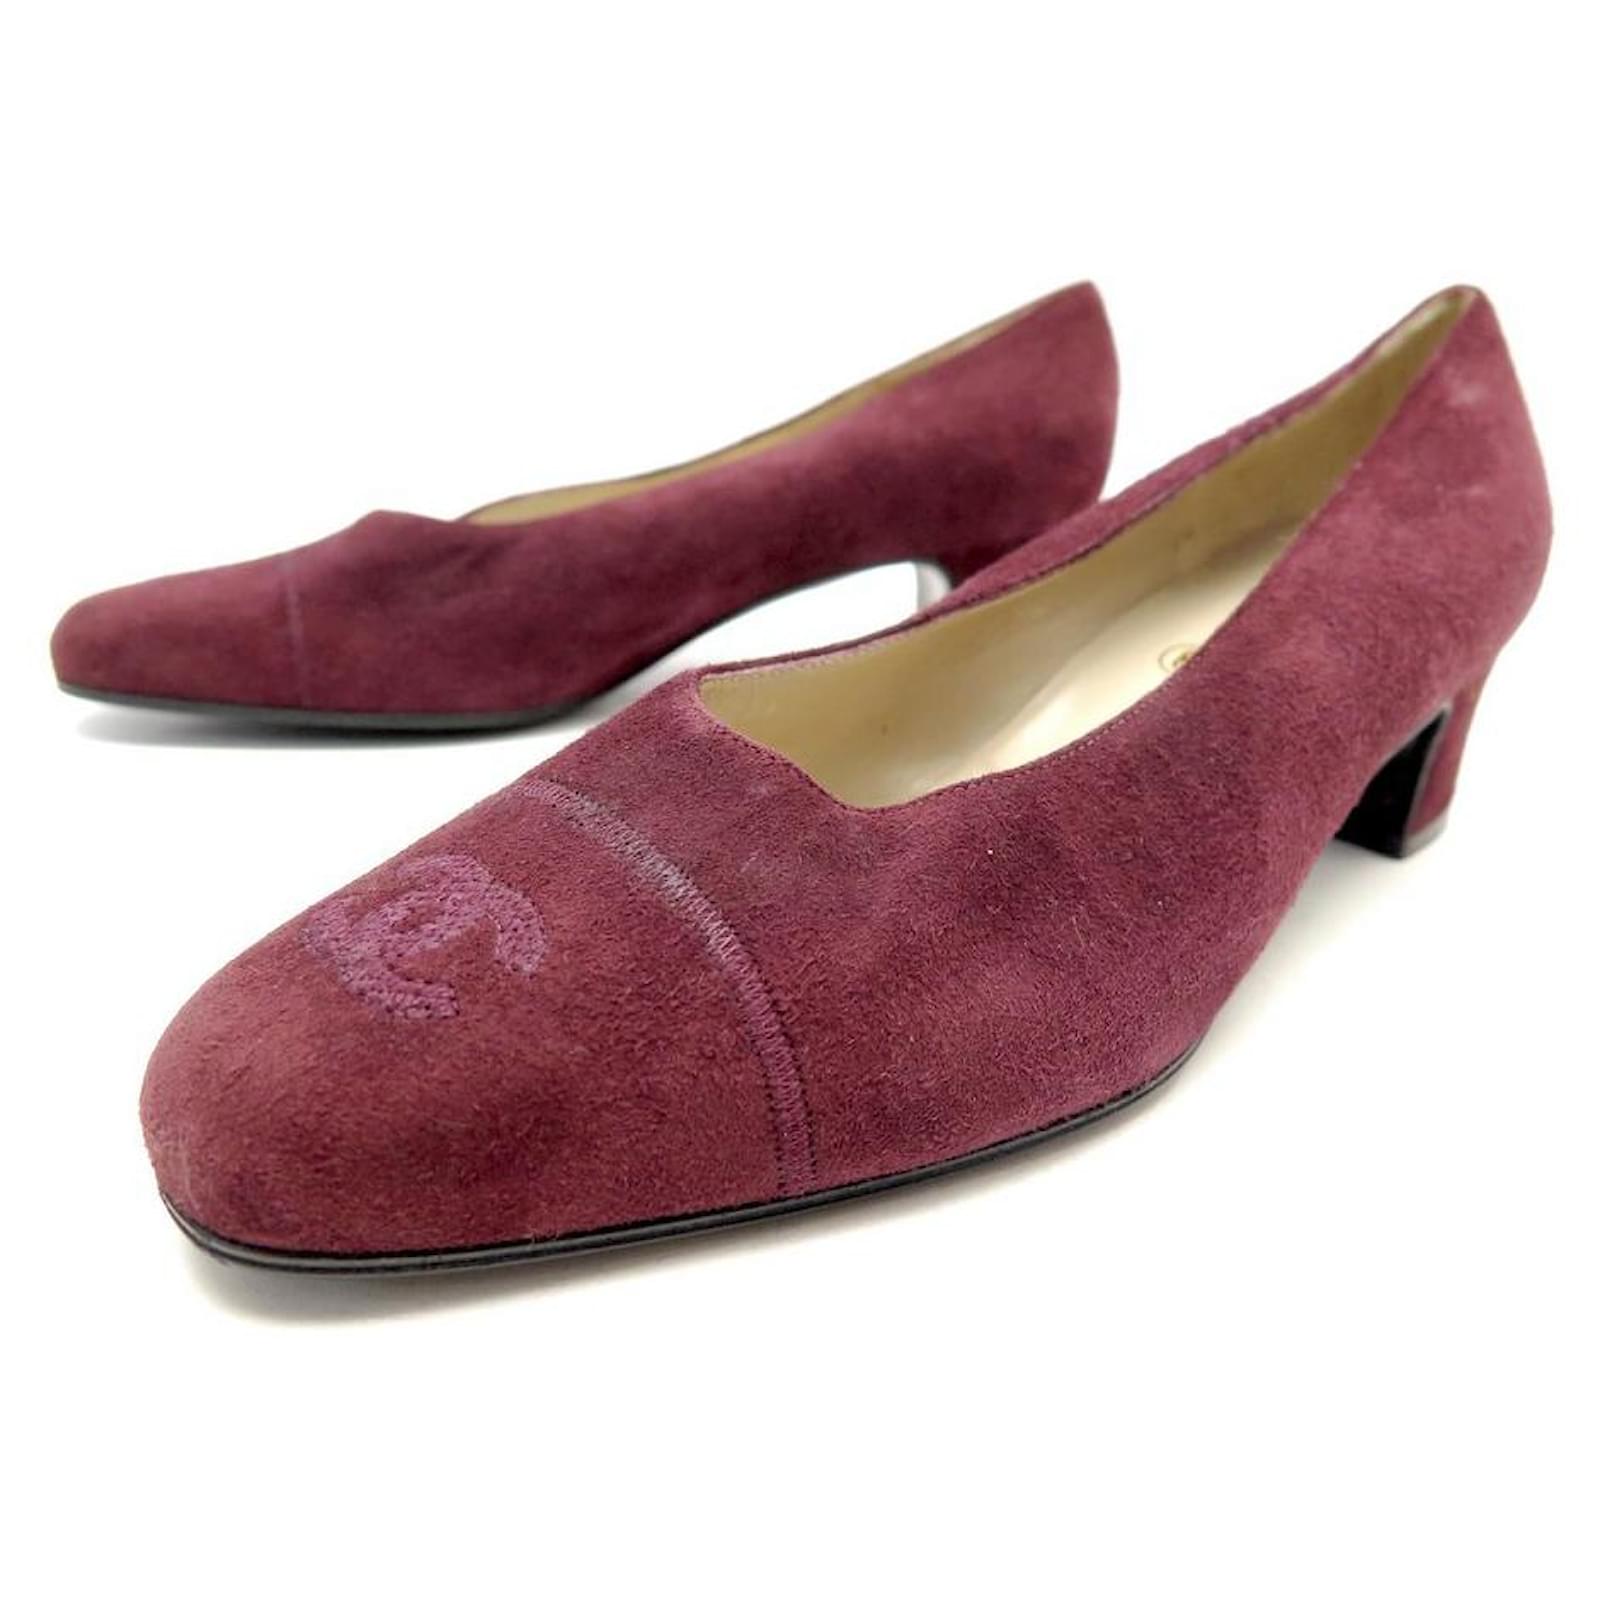 VINTAGE CHANEL SHOES PUMPS LOGO CC EMBROIDERED IN BURGUNDY SUEDE SUEDE SHOES